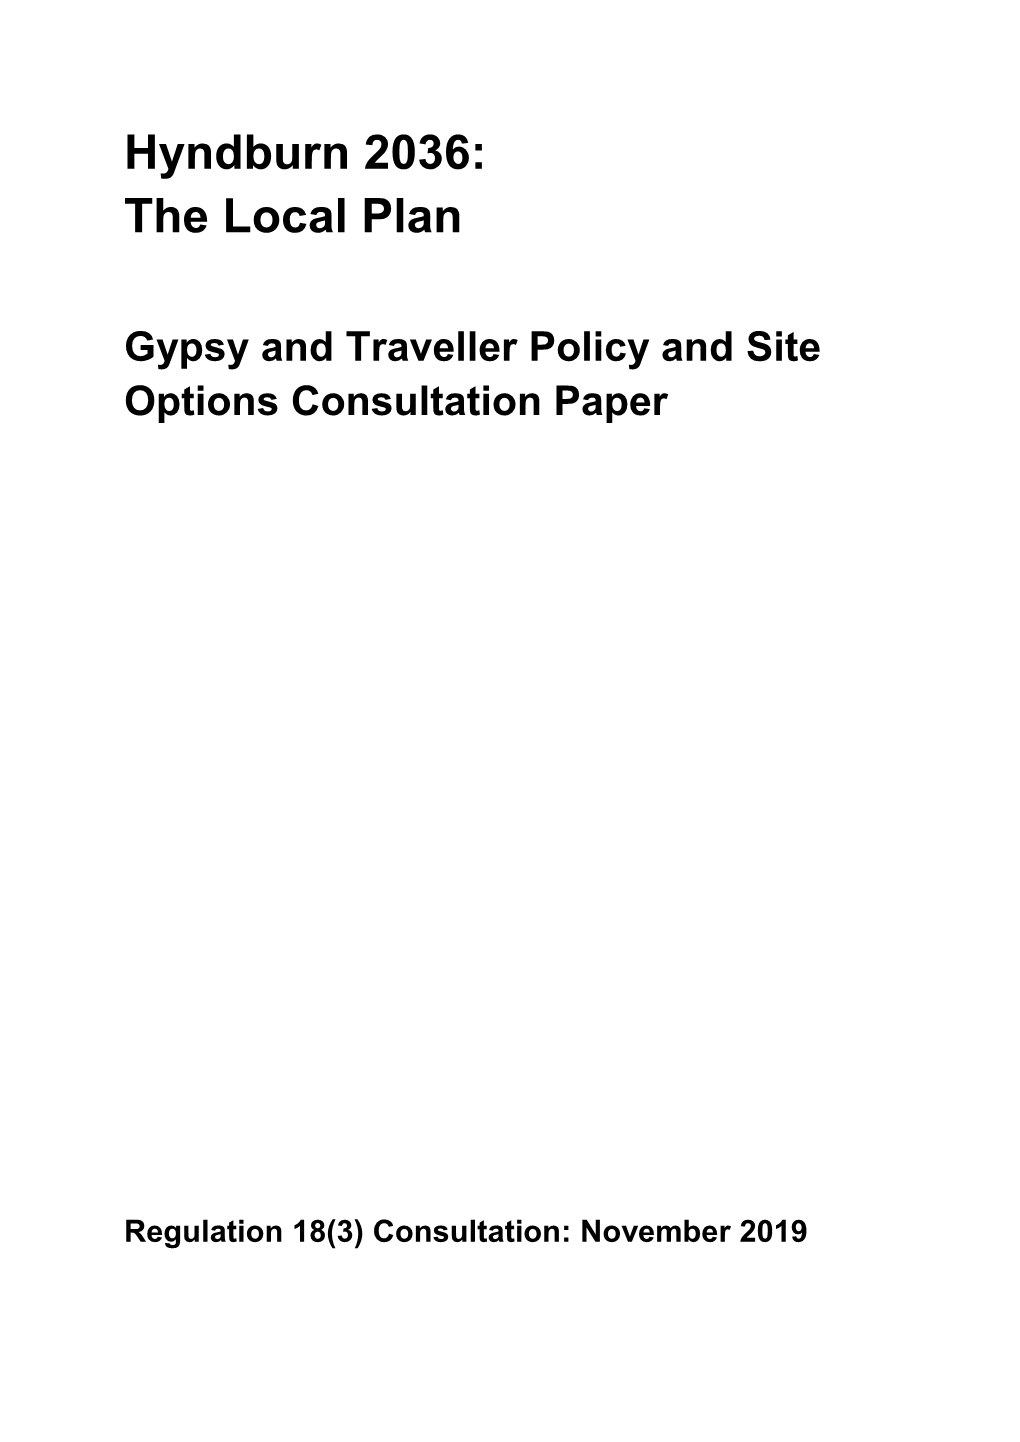 Gypsy and Traveller Policy and Site Options Consultation Paper